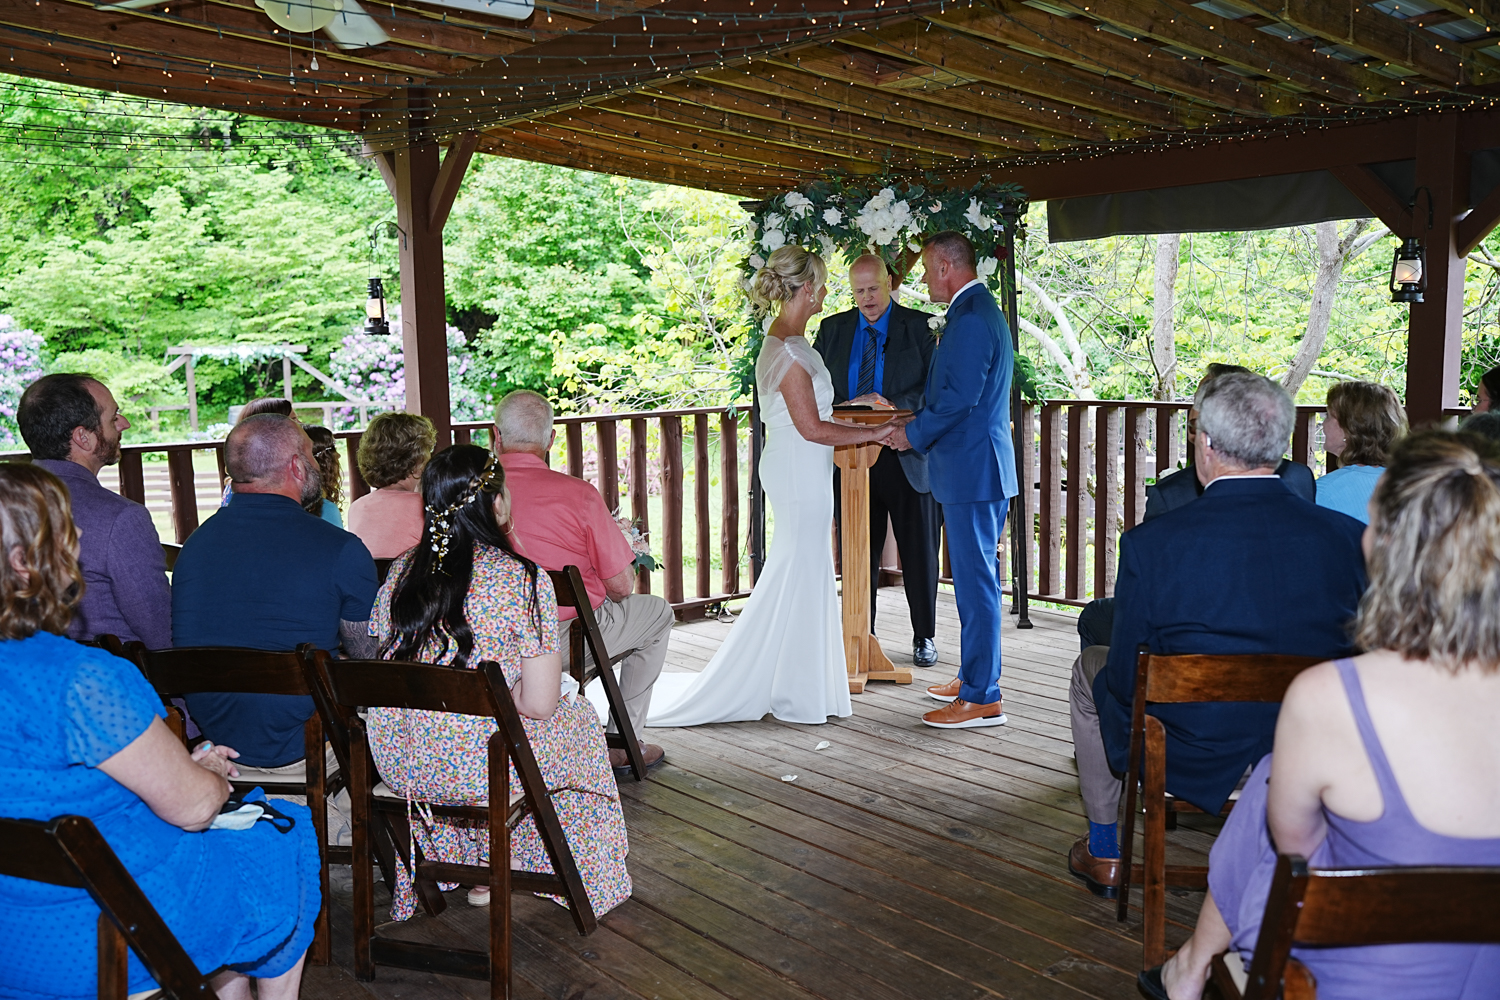 Wedding ceremony under a covered pavilion in the spring